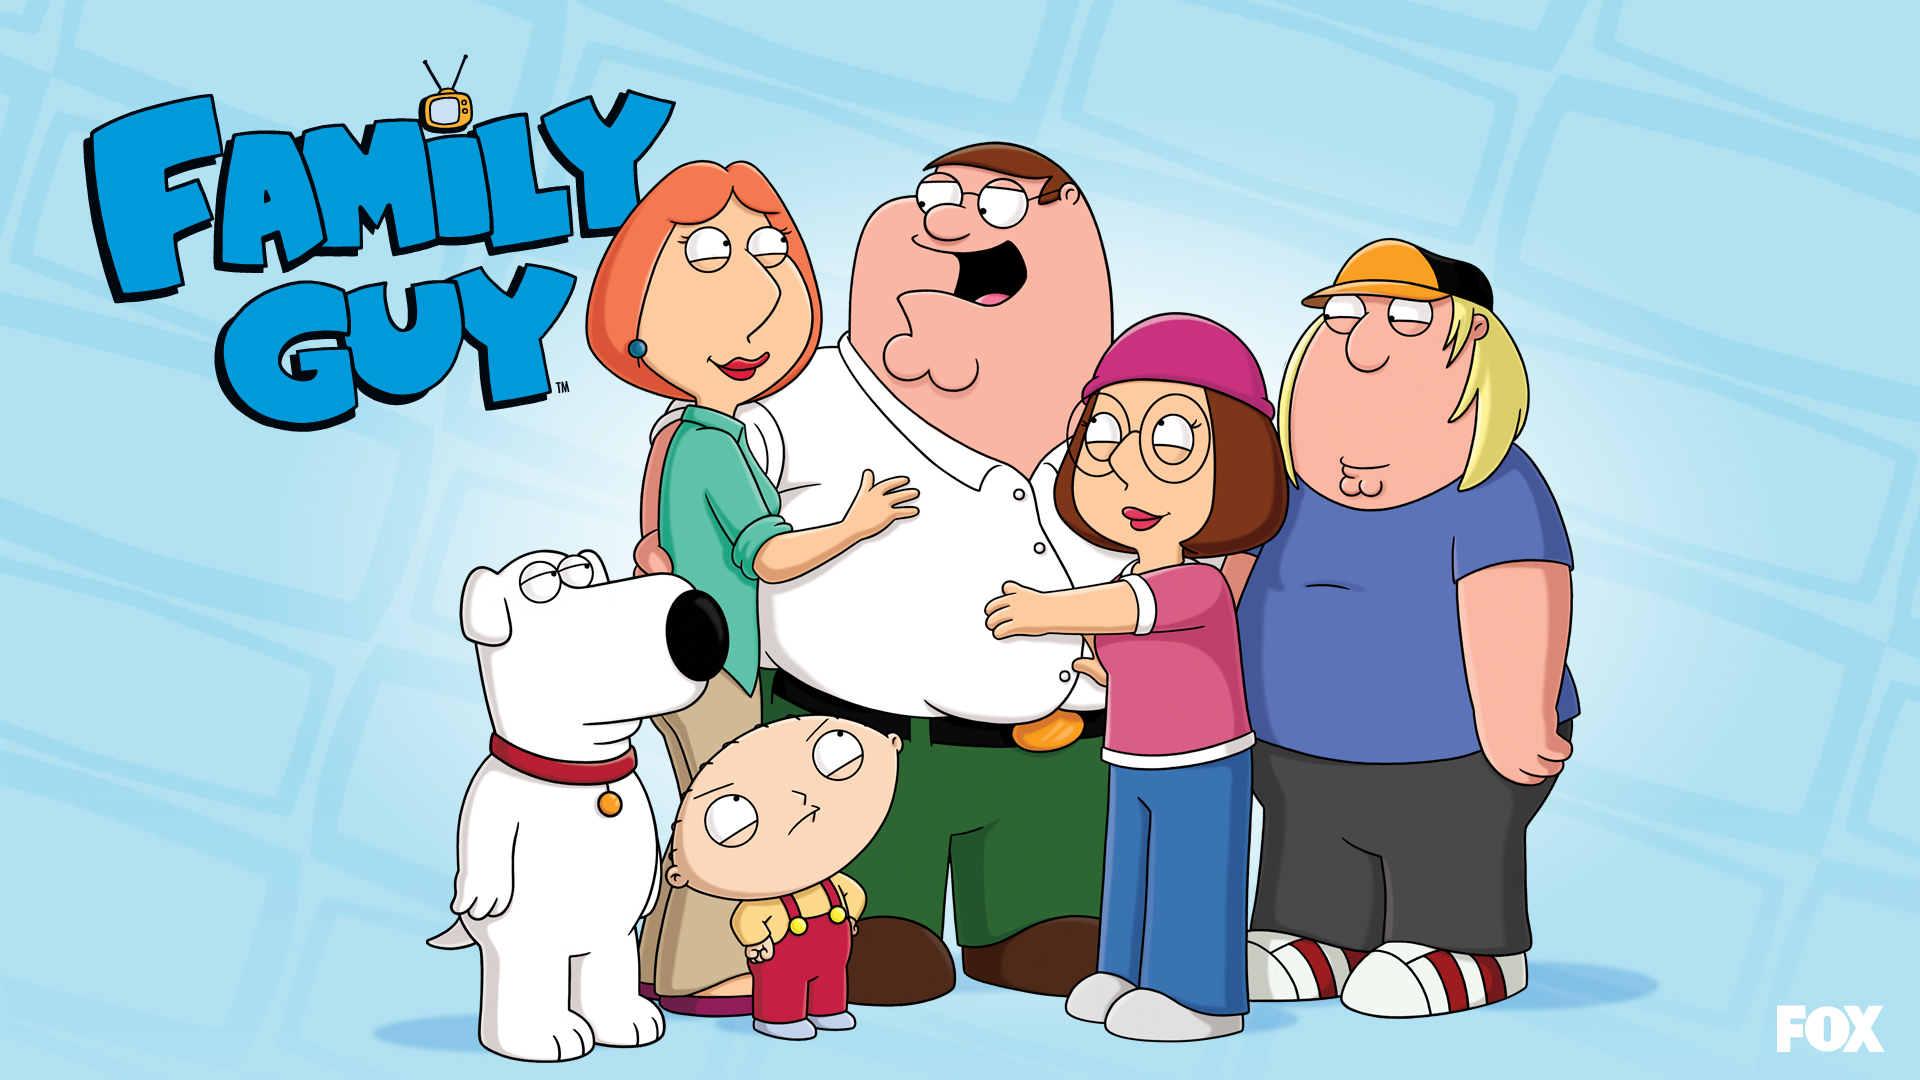 Family Guy Game Coming to iOS and Android in 2014